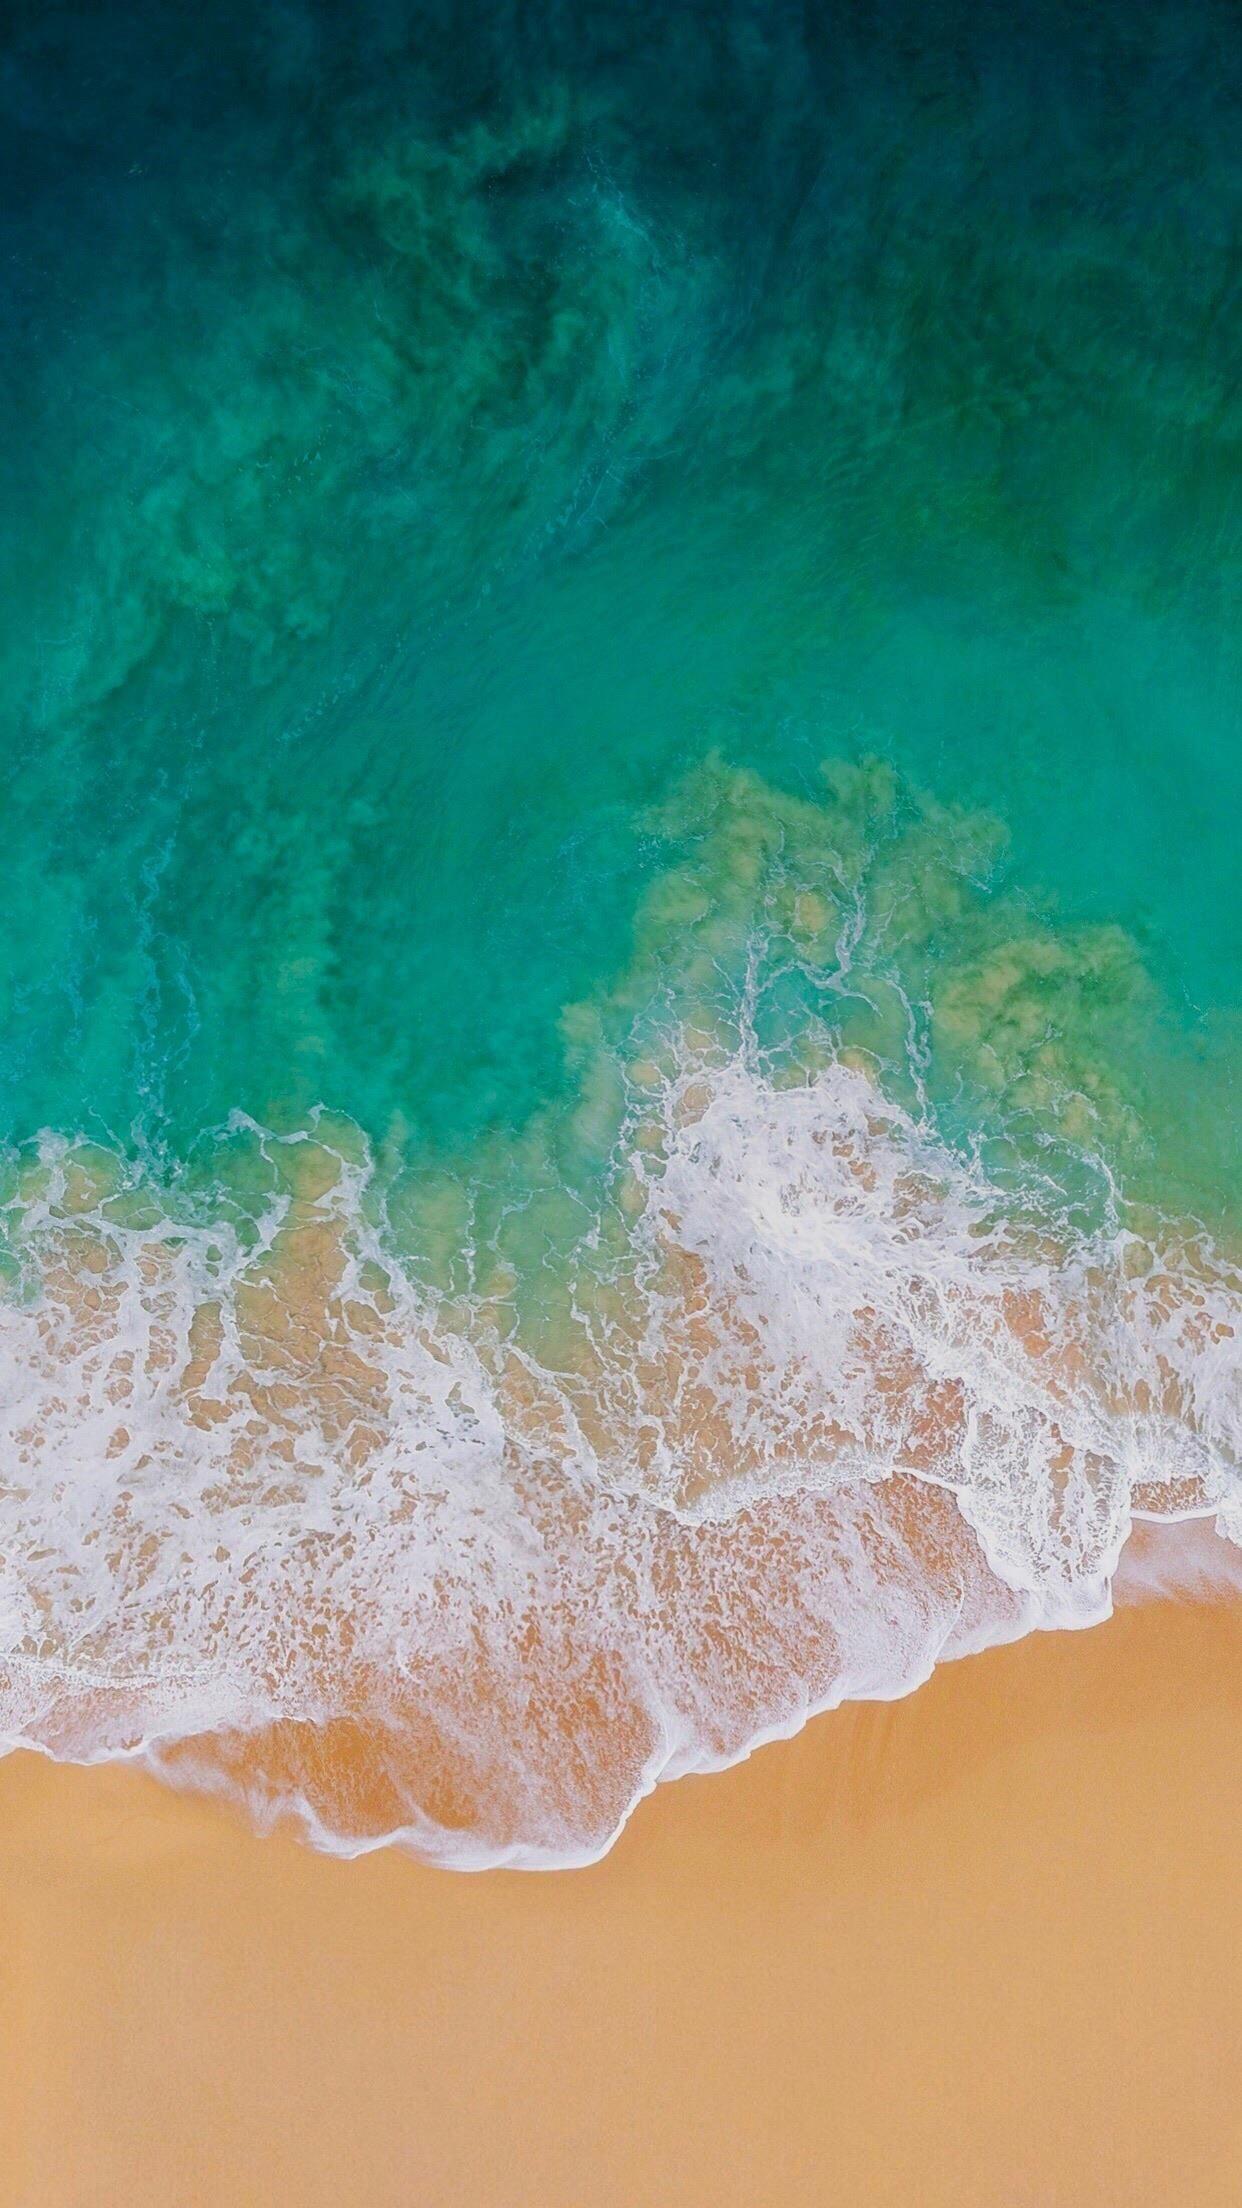 Get iOS 11's New Wallpaper on Any Phone « iOS & iPhone